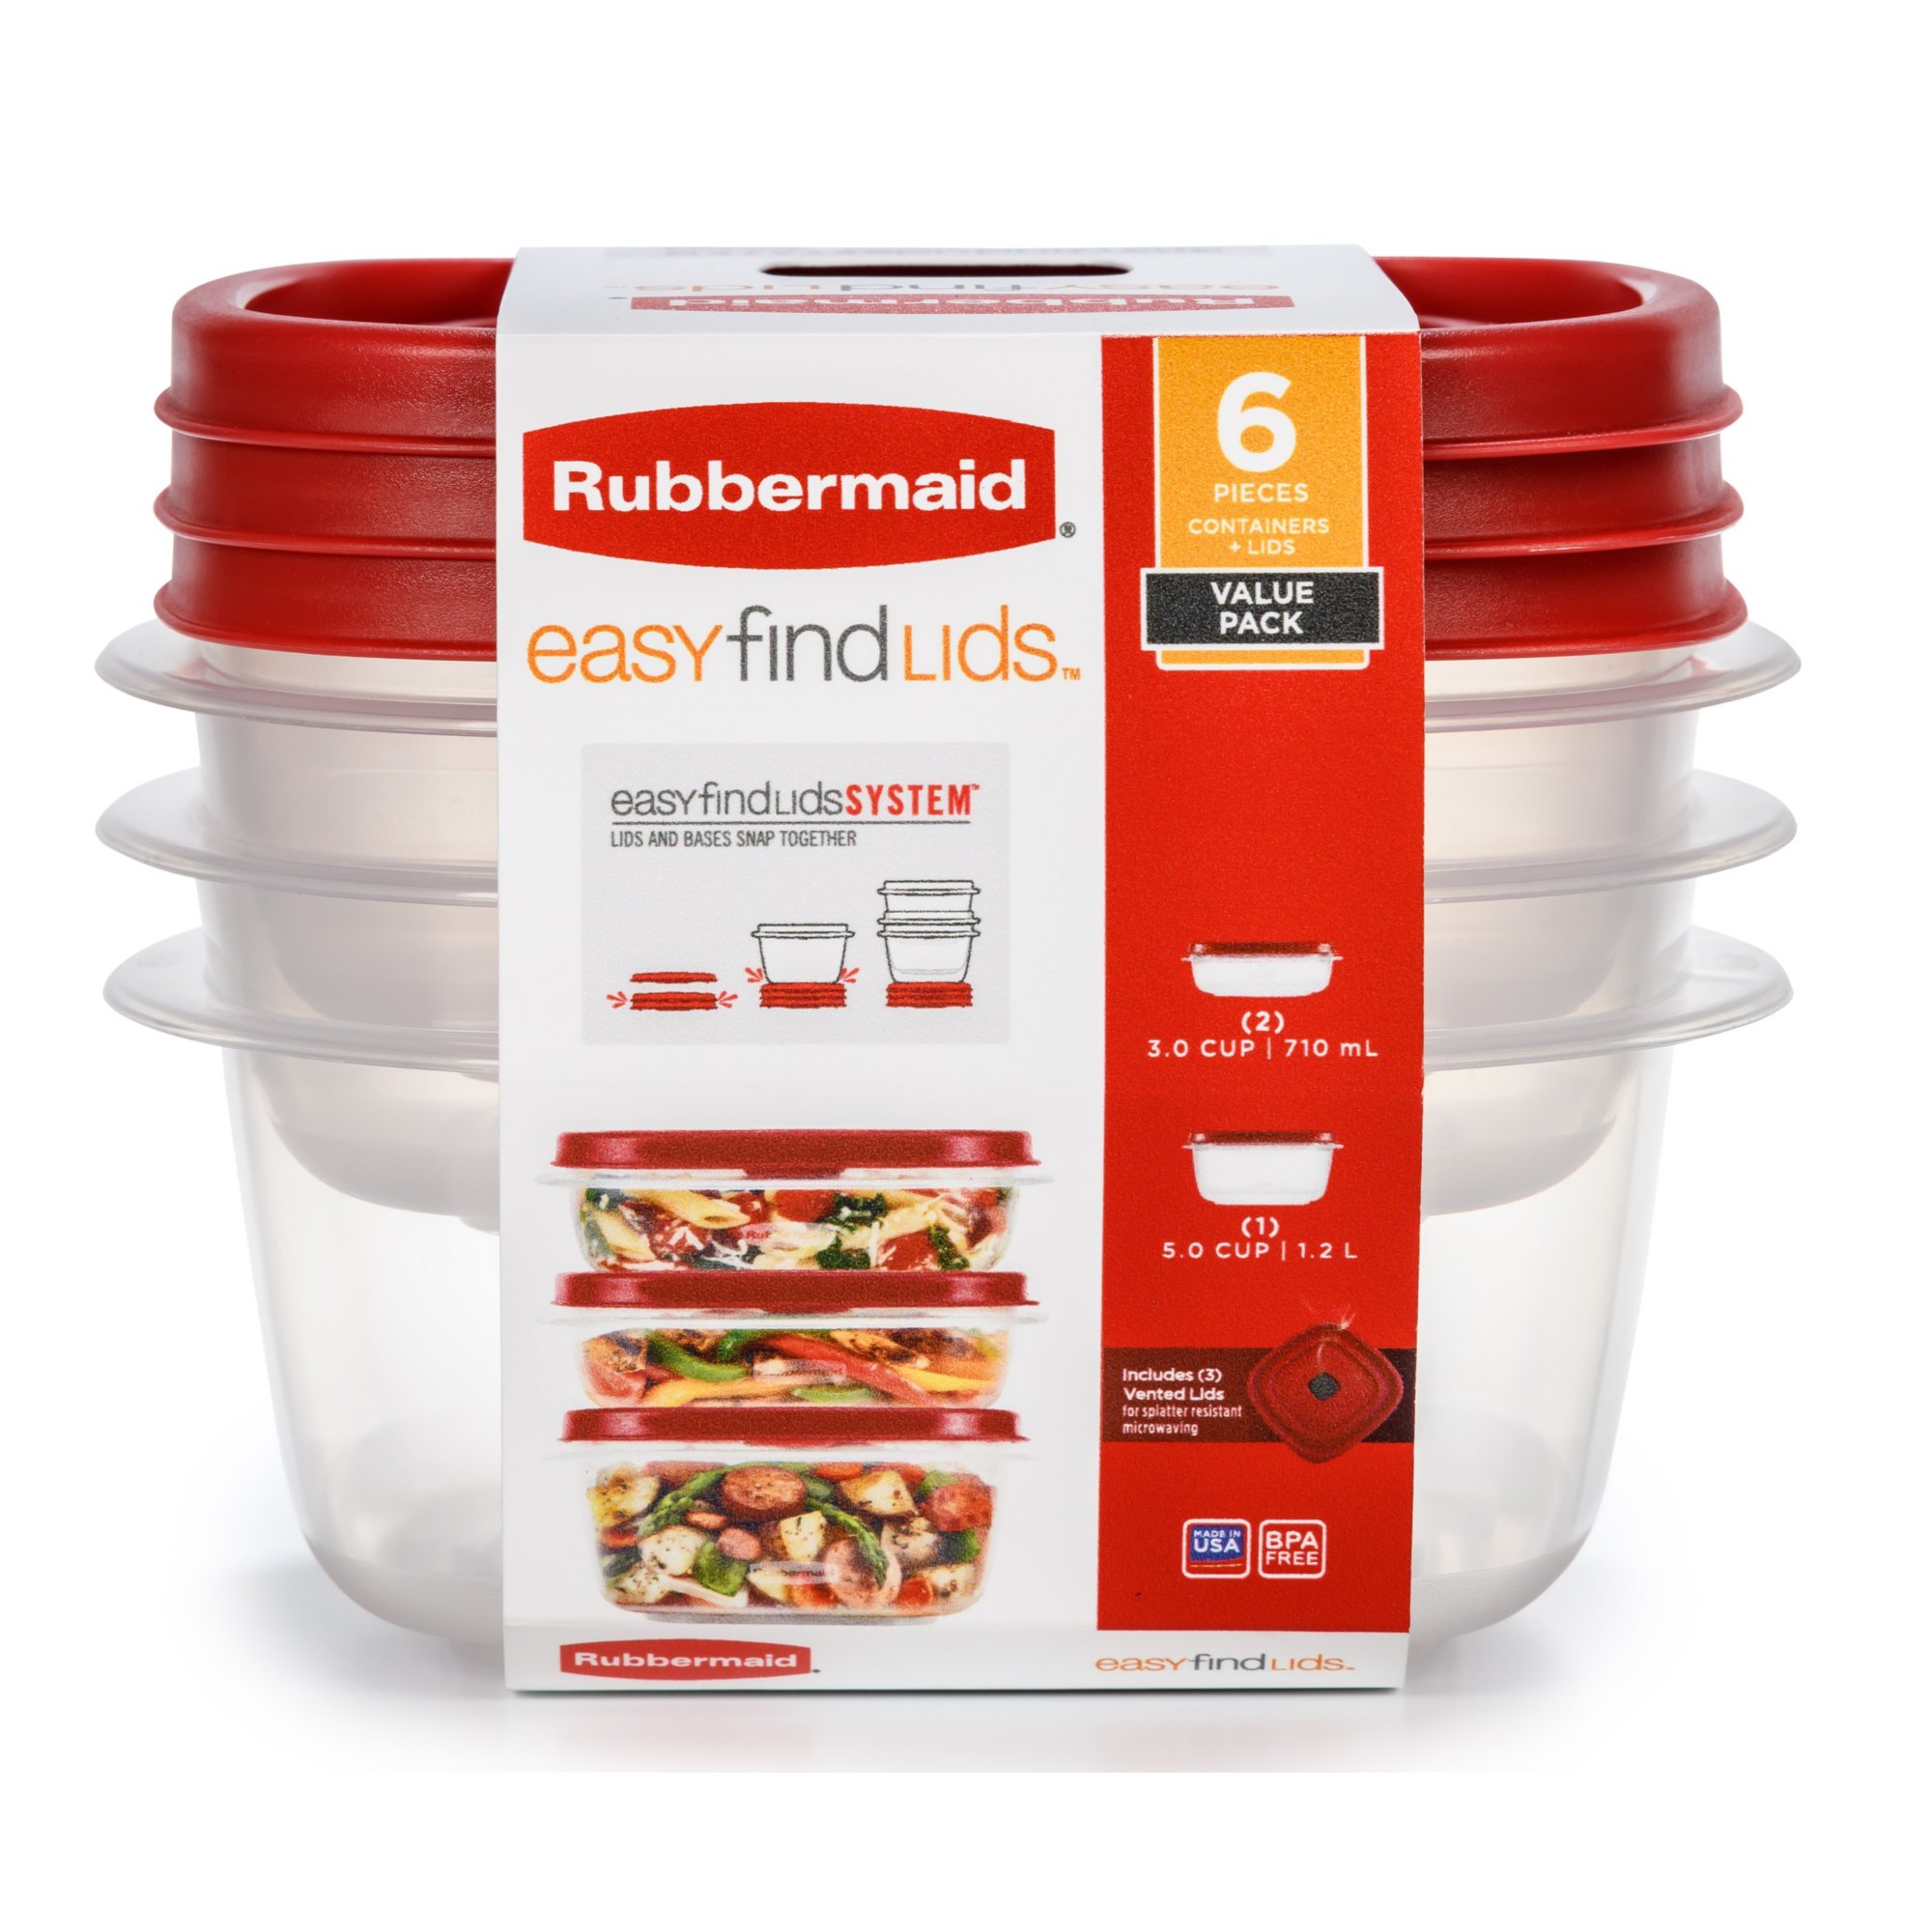 Rubbermaid Home 2039756 Easy Find Lids Durable Food Container Pack